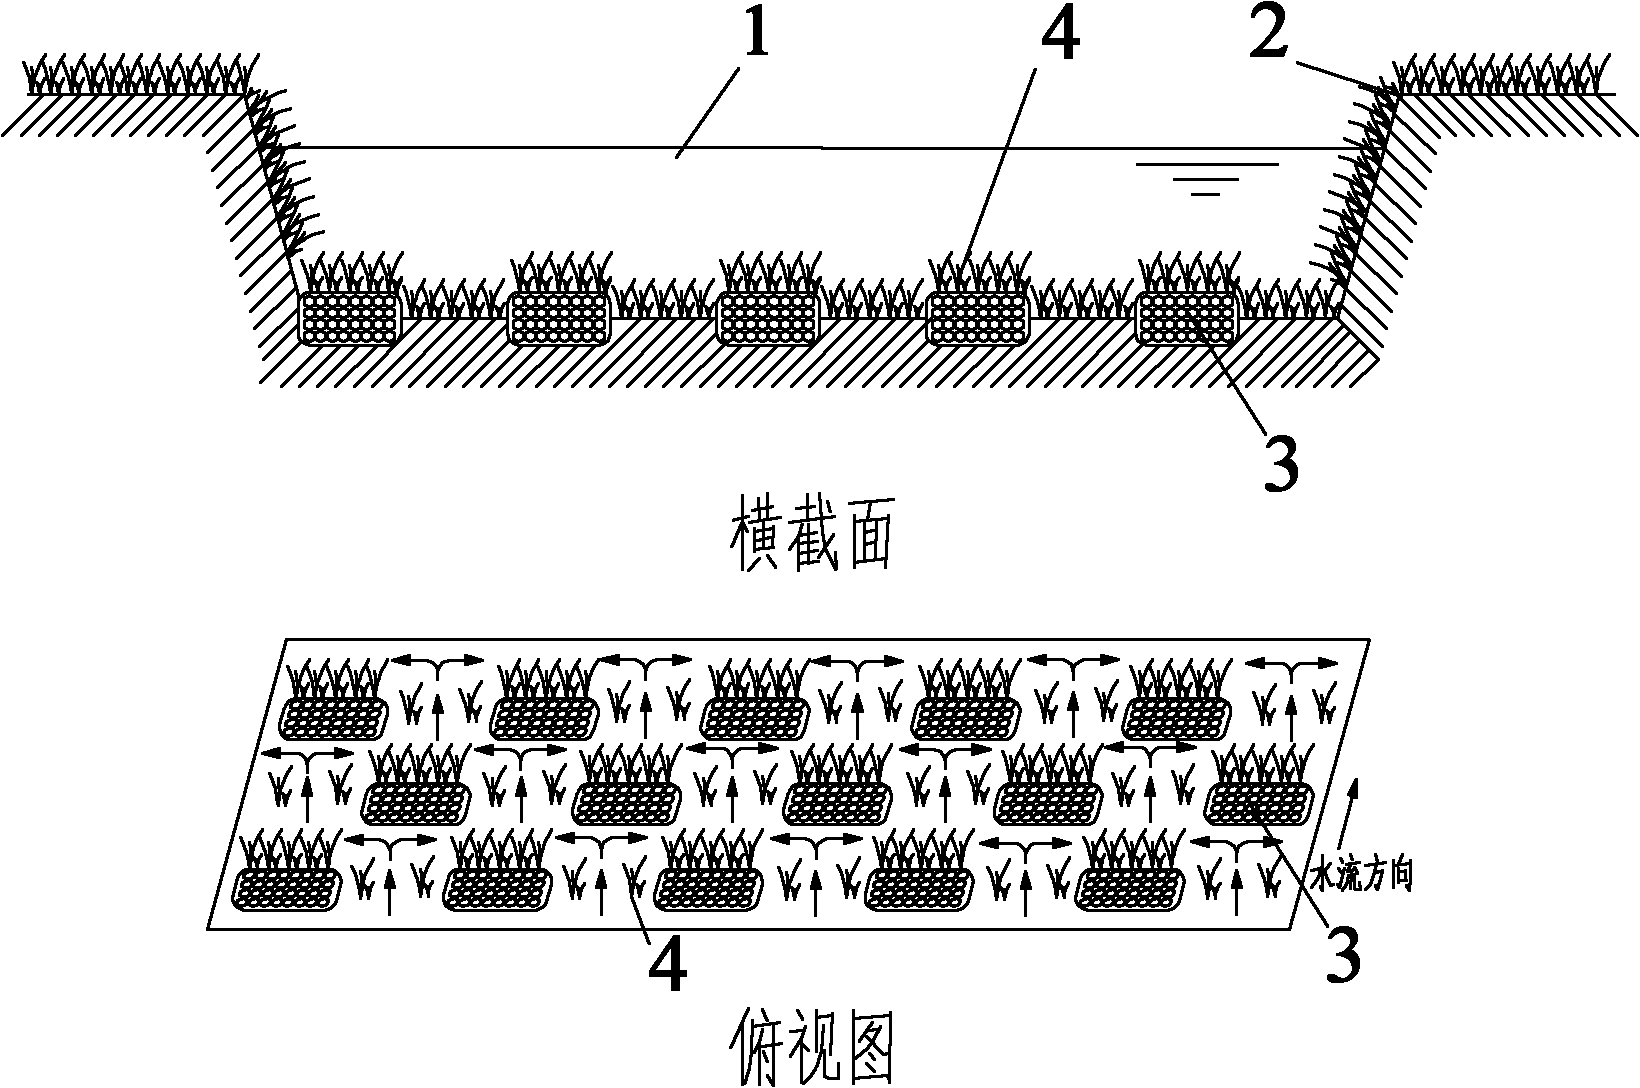 Biological filler bag and application thereof in sewage treatment